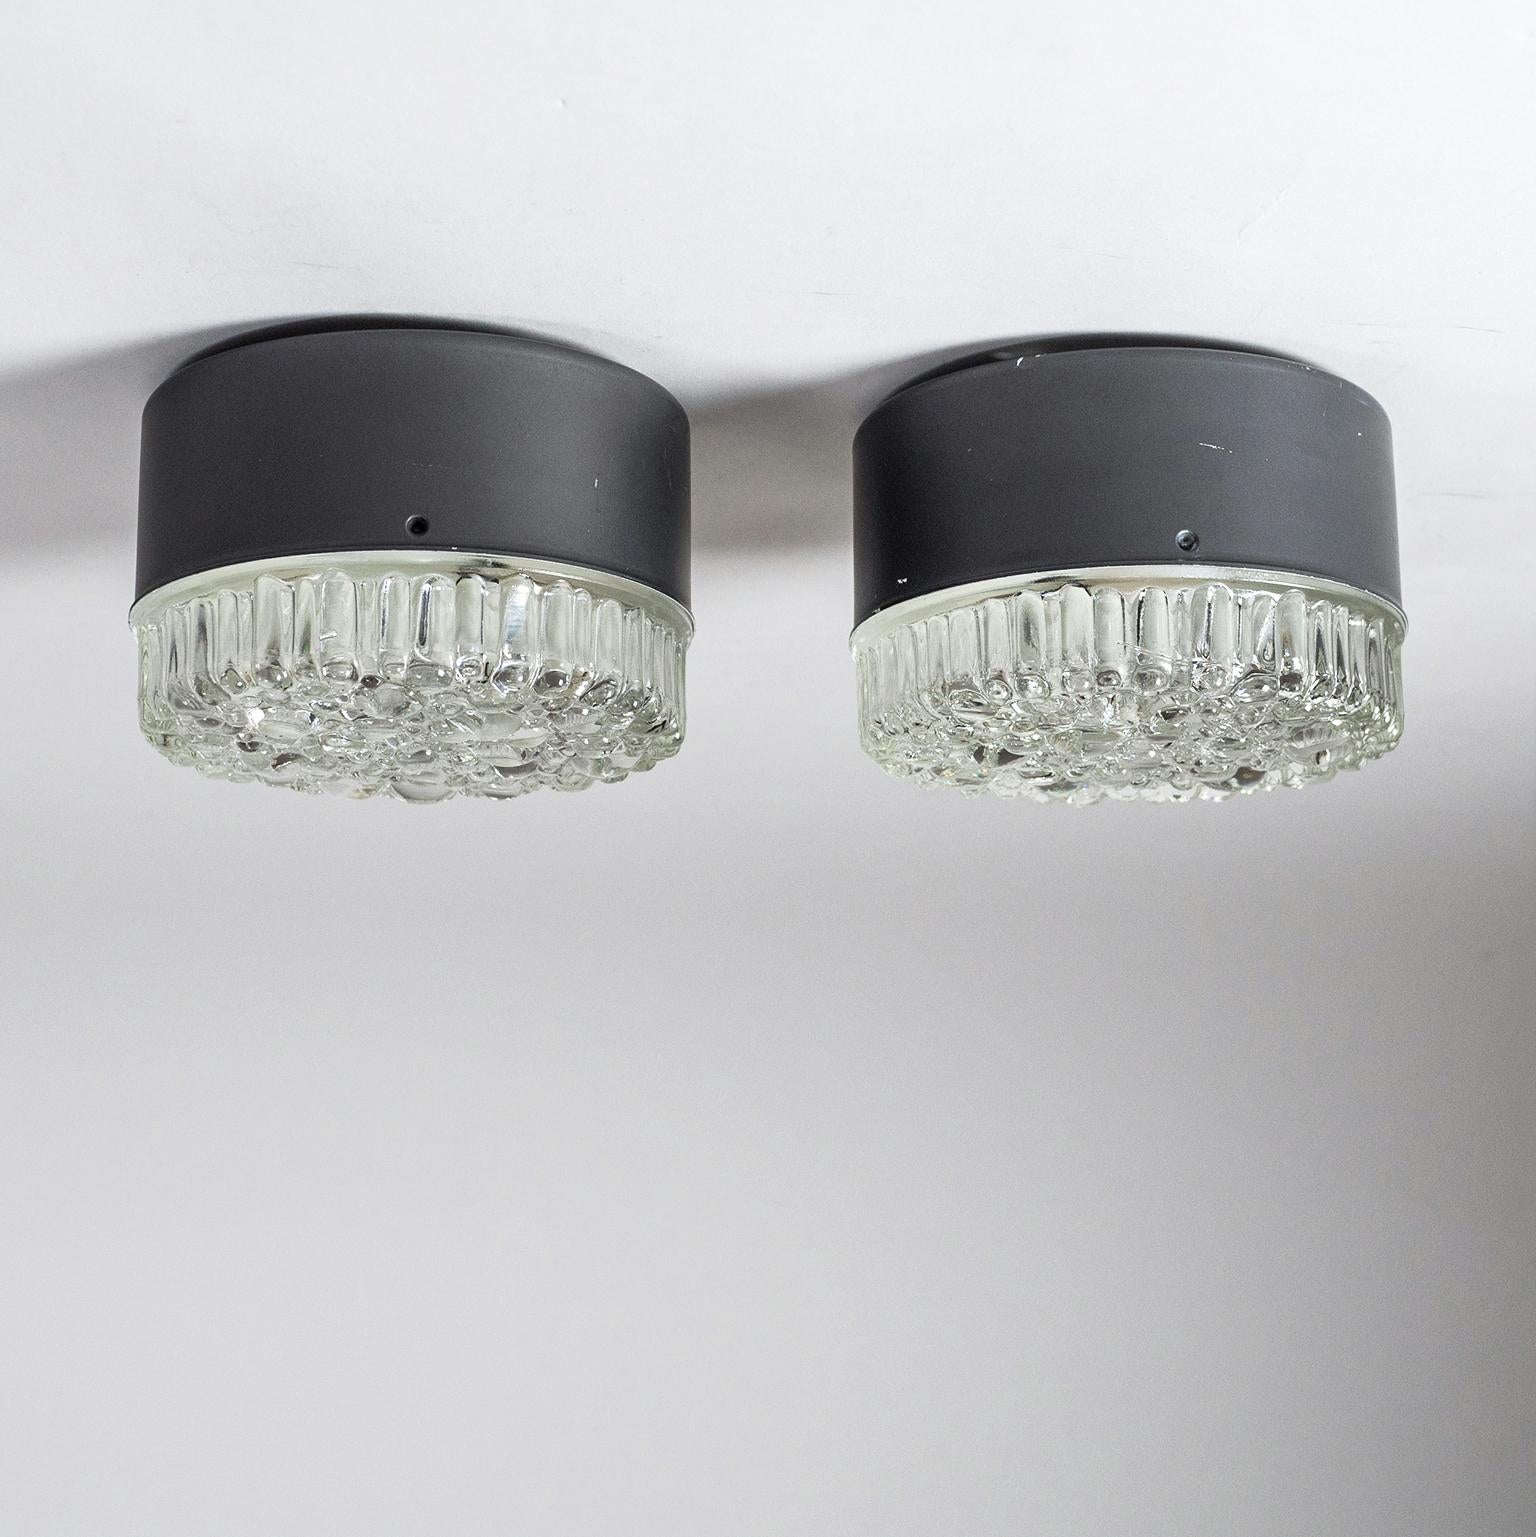 Mid-20th Century Four Wall or Ceiling Lights, 1960s, Bubble Glass For Sale